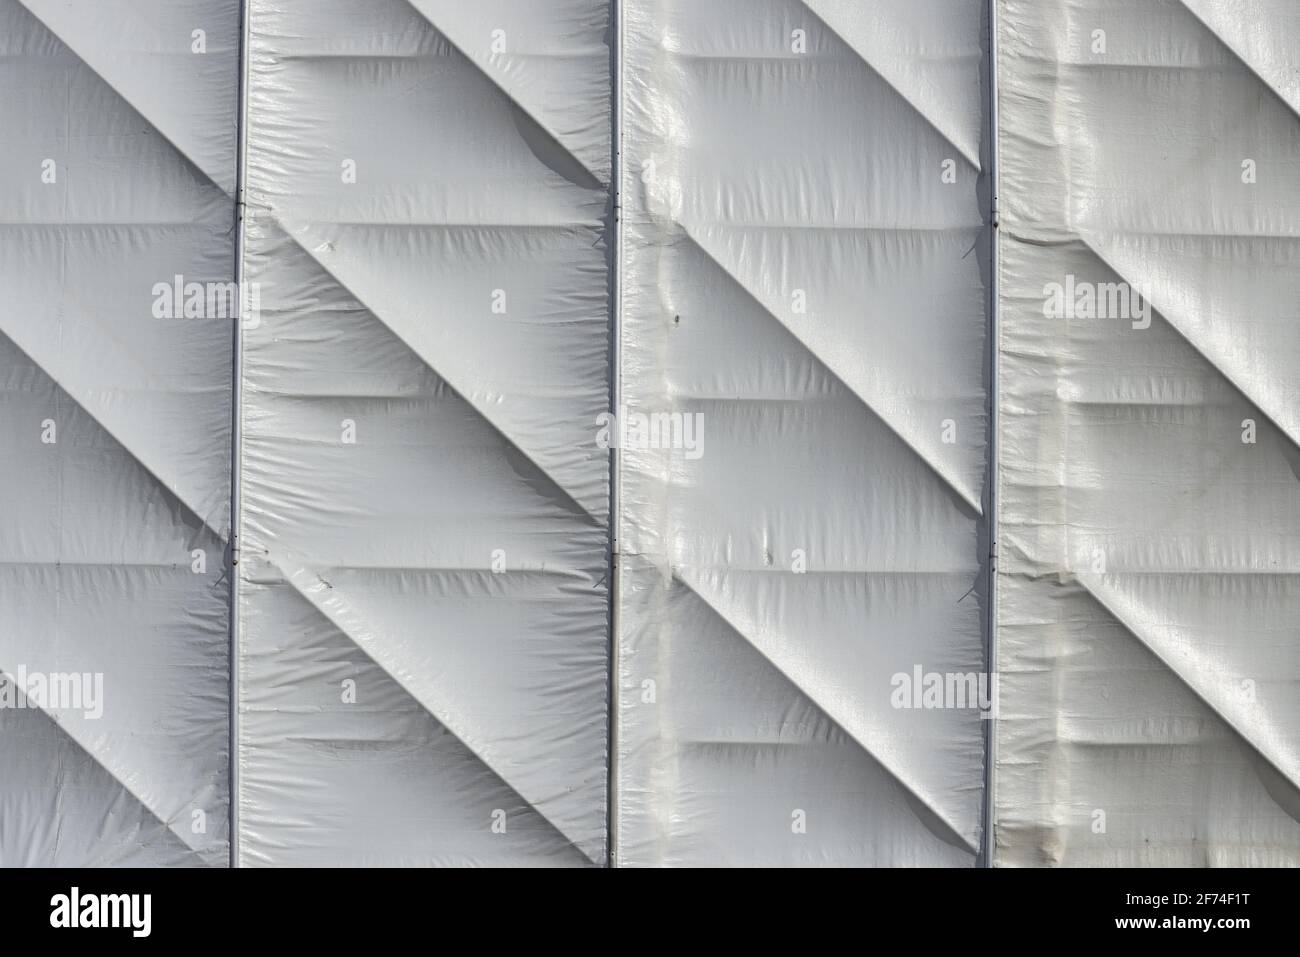 white synthetic material tarpaulin sheet, covering an interior wooden armature Stock Photo